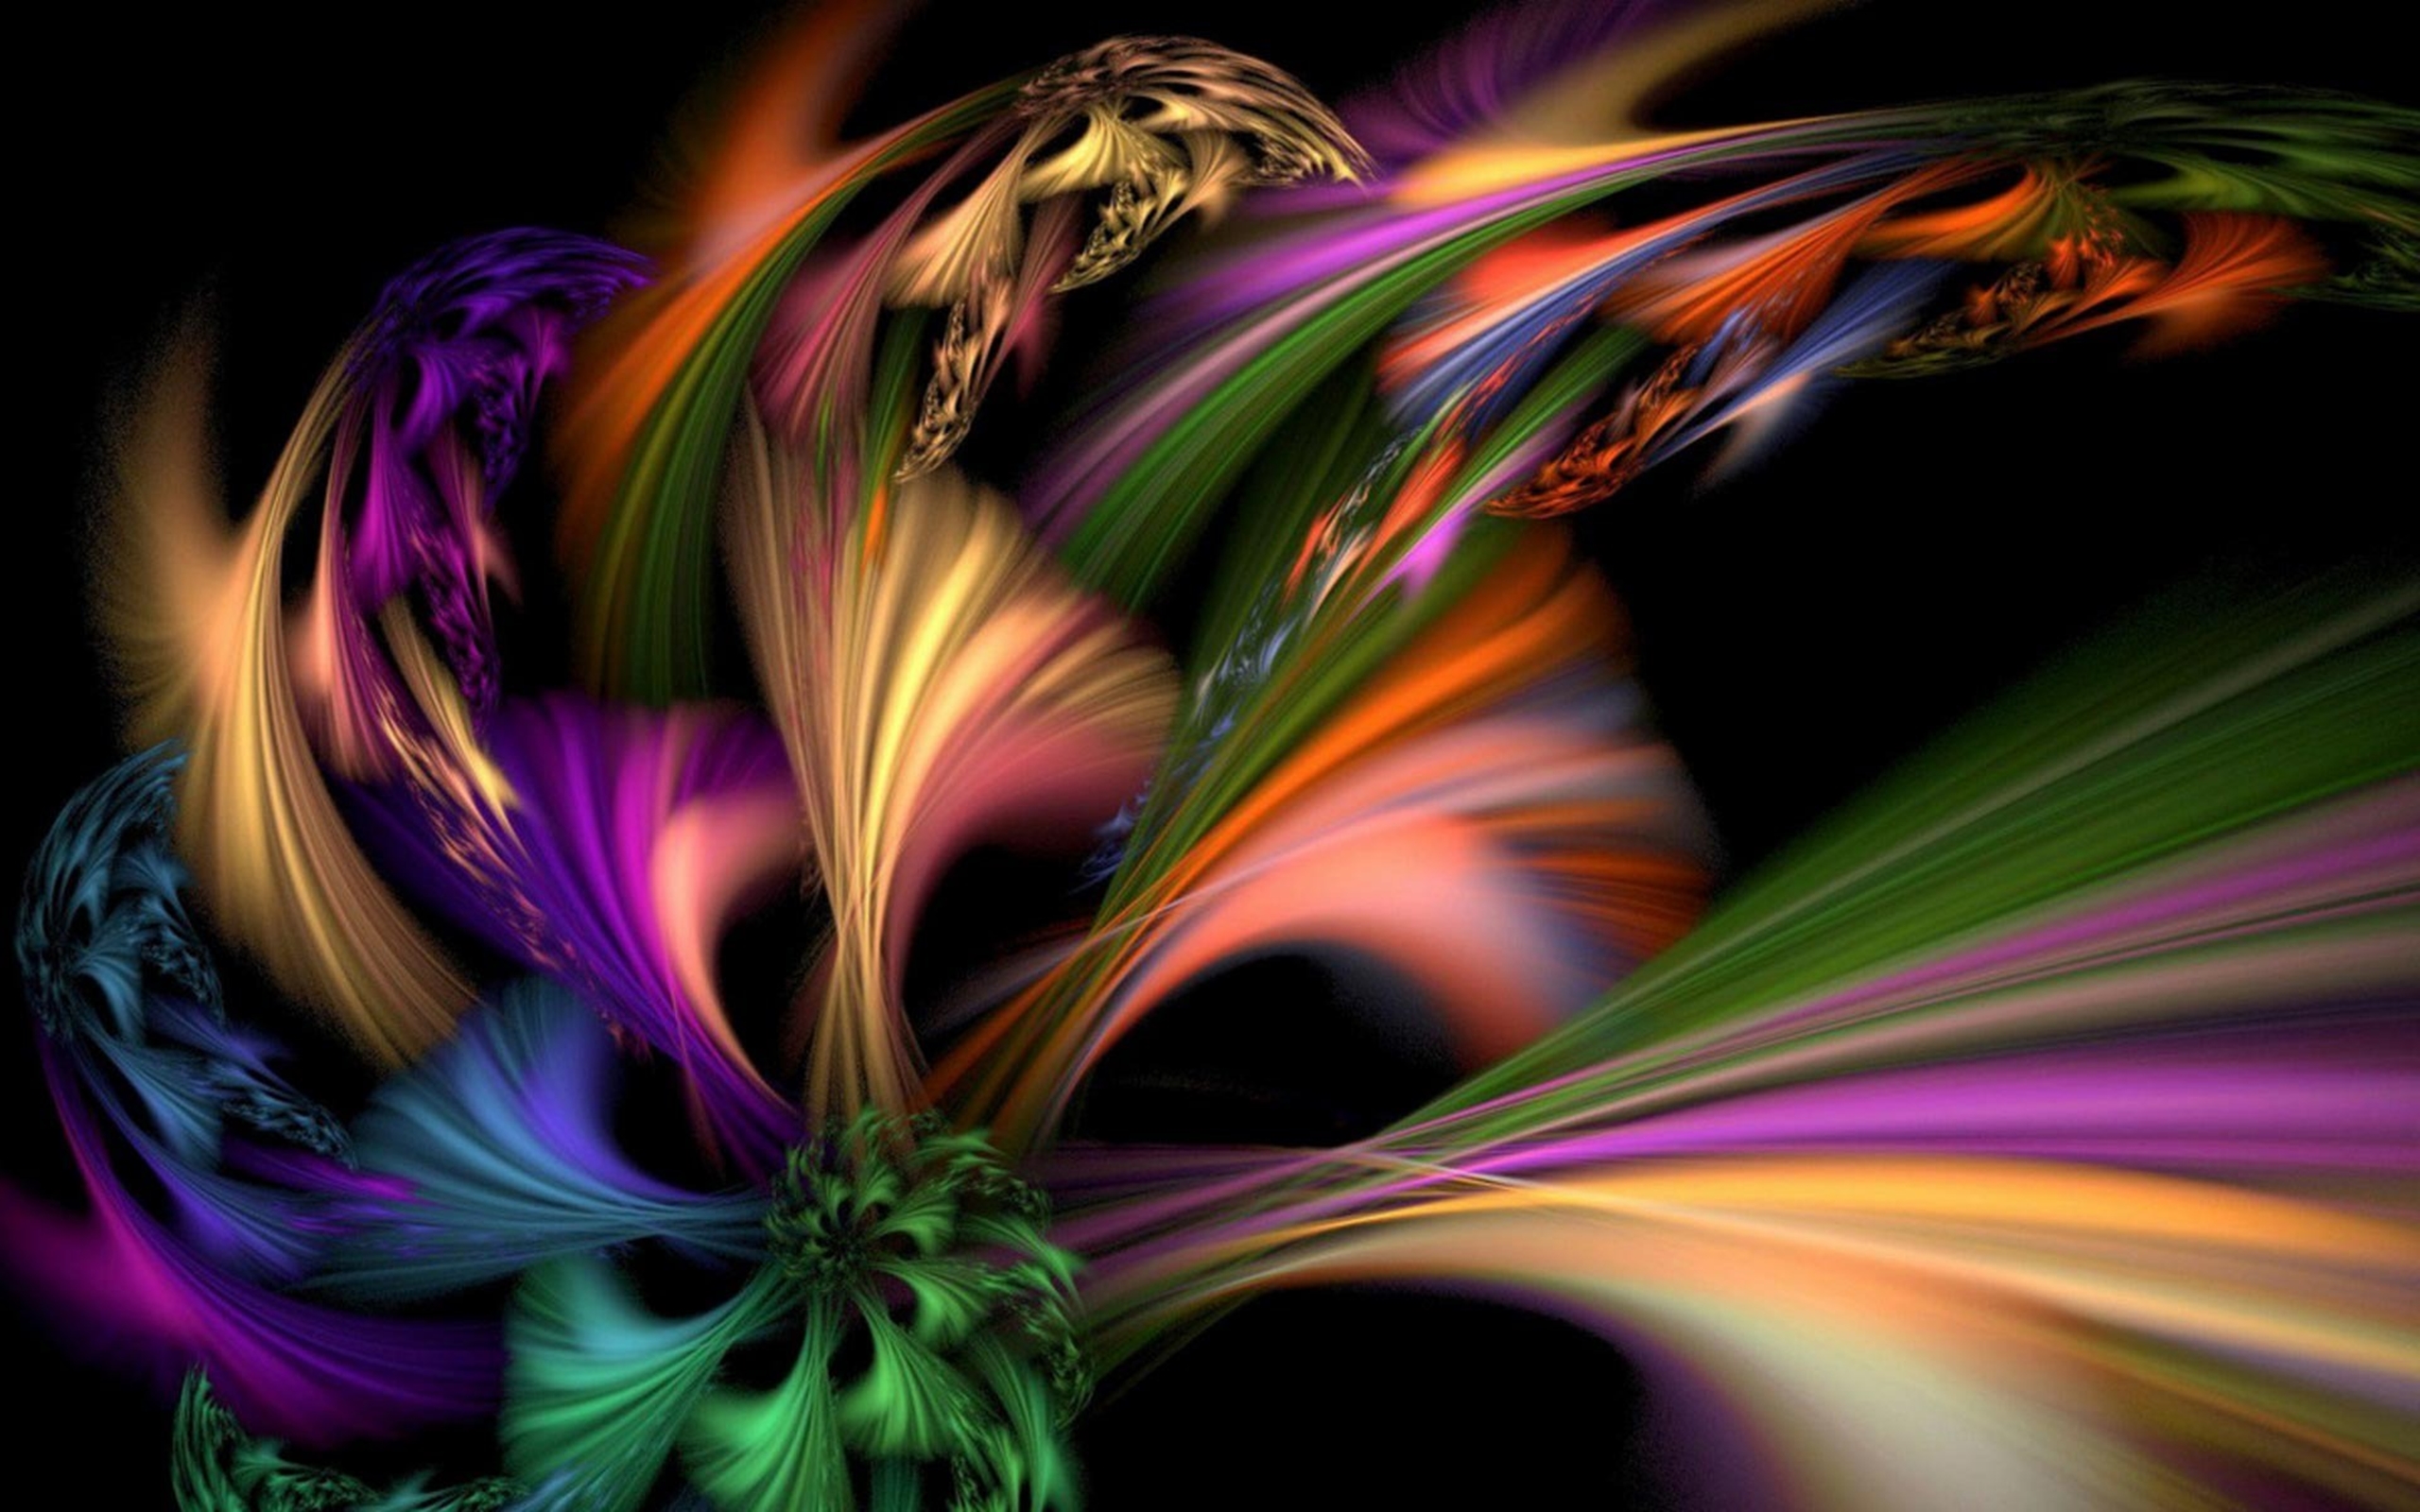 Color Burst Abstract Wallpaper 2560x1600 Wallpapers13 Com Images, Photos, Reviews